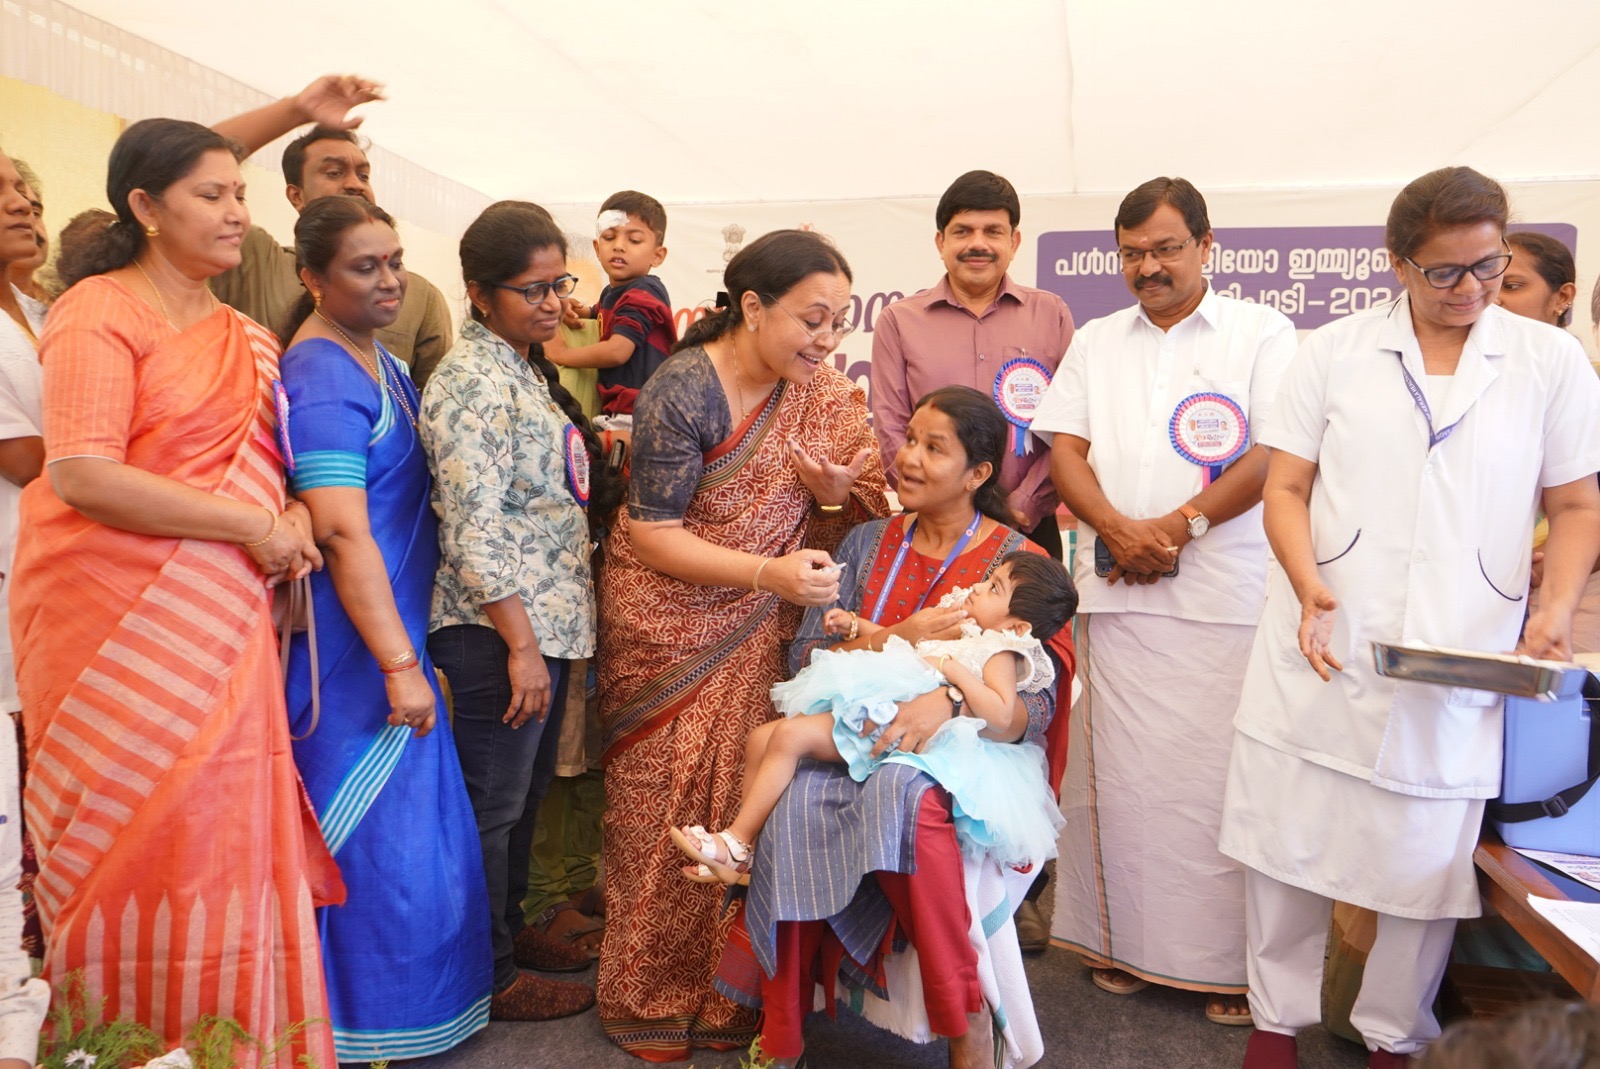 19.80 lakh children were given polio drops in the state